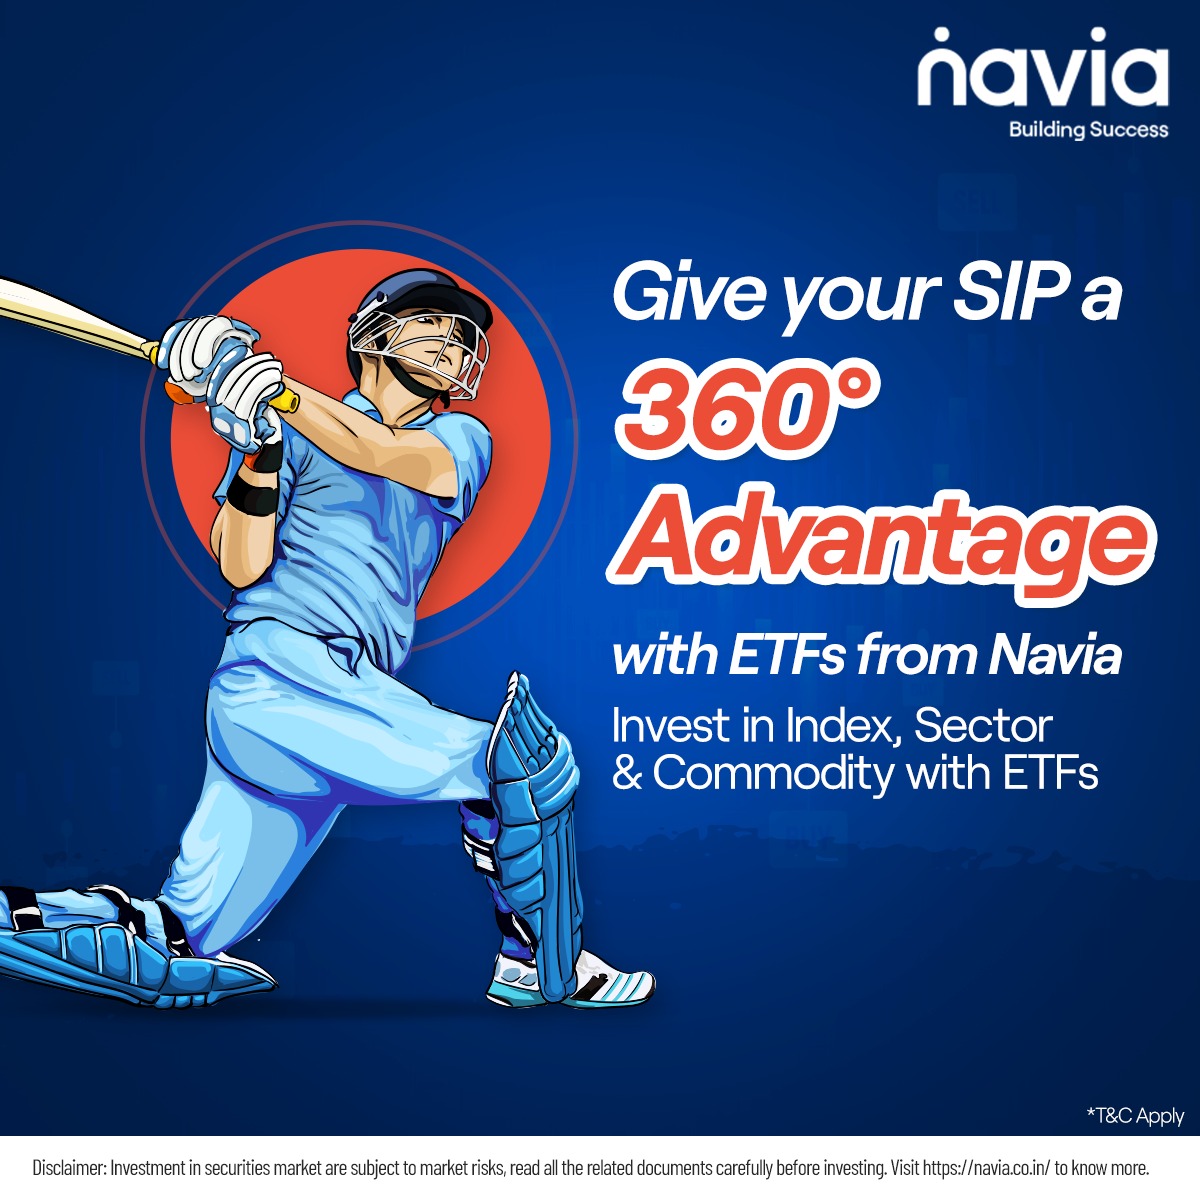 Ready to supercharge your portfolio? Explore Index, Sector & Commodity ETFs with Navia and experience the 360° advantage. Get started today!

#Navia #TrustedTradingPartner #TradeSmart #FinancialFreedom #InvestingJourney #StockMarket #Trading #WealthCreation #GrowYourSIP